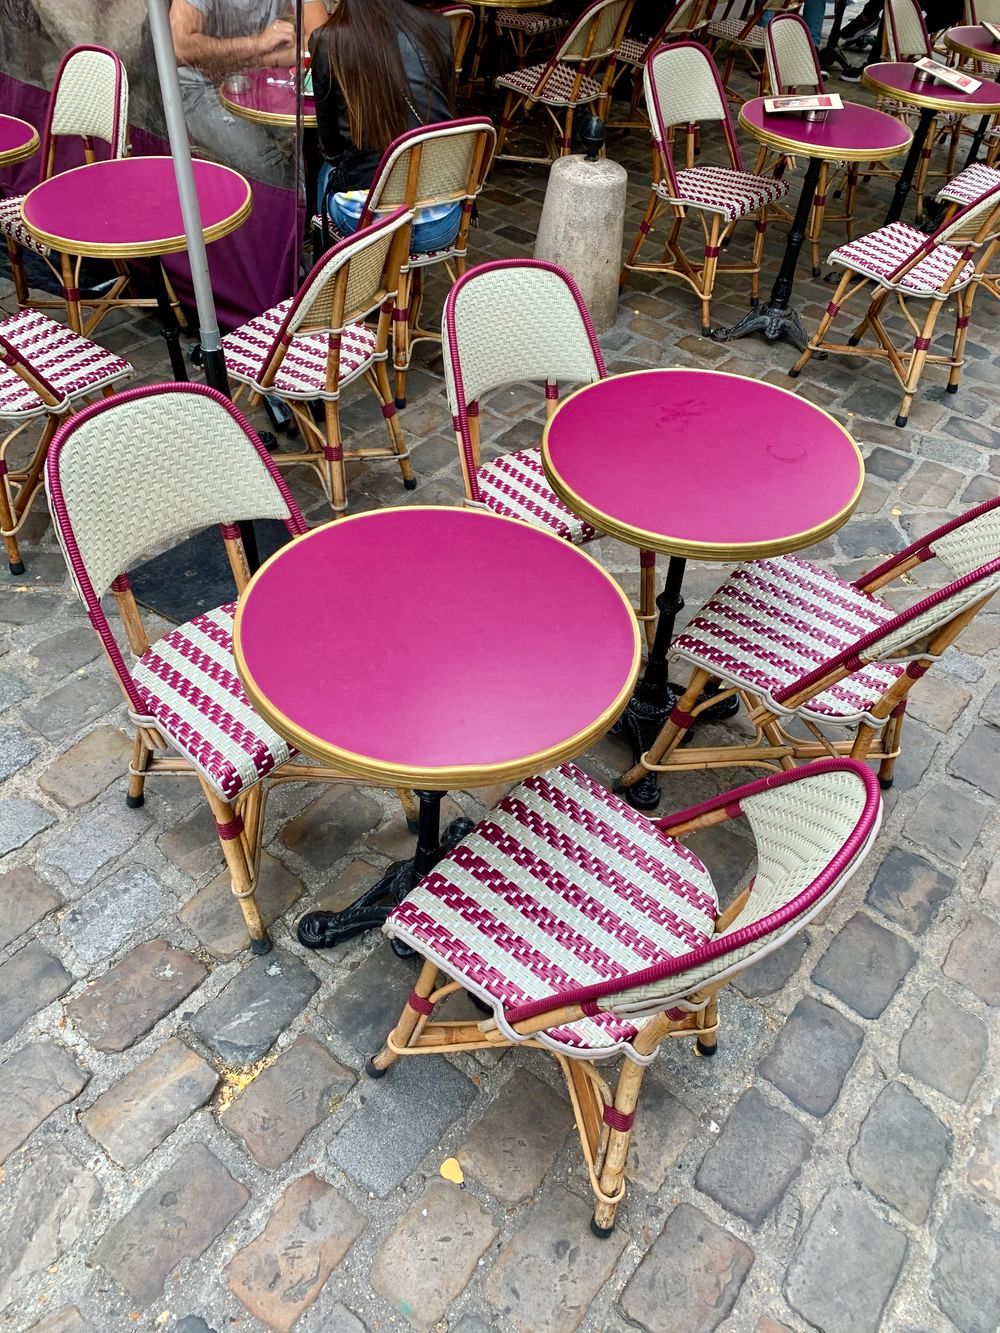 What paris cafe tables chairs look like IMG_1940